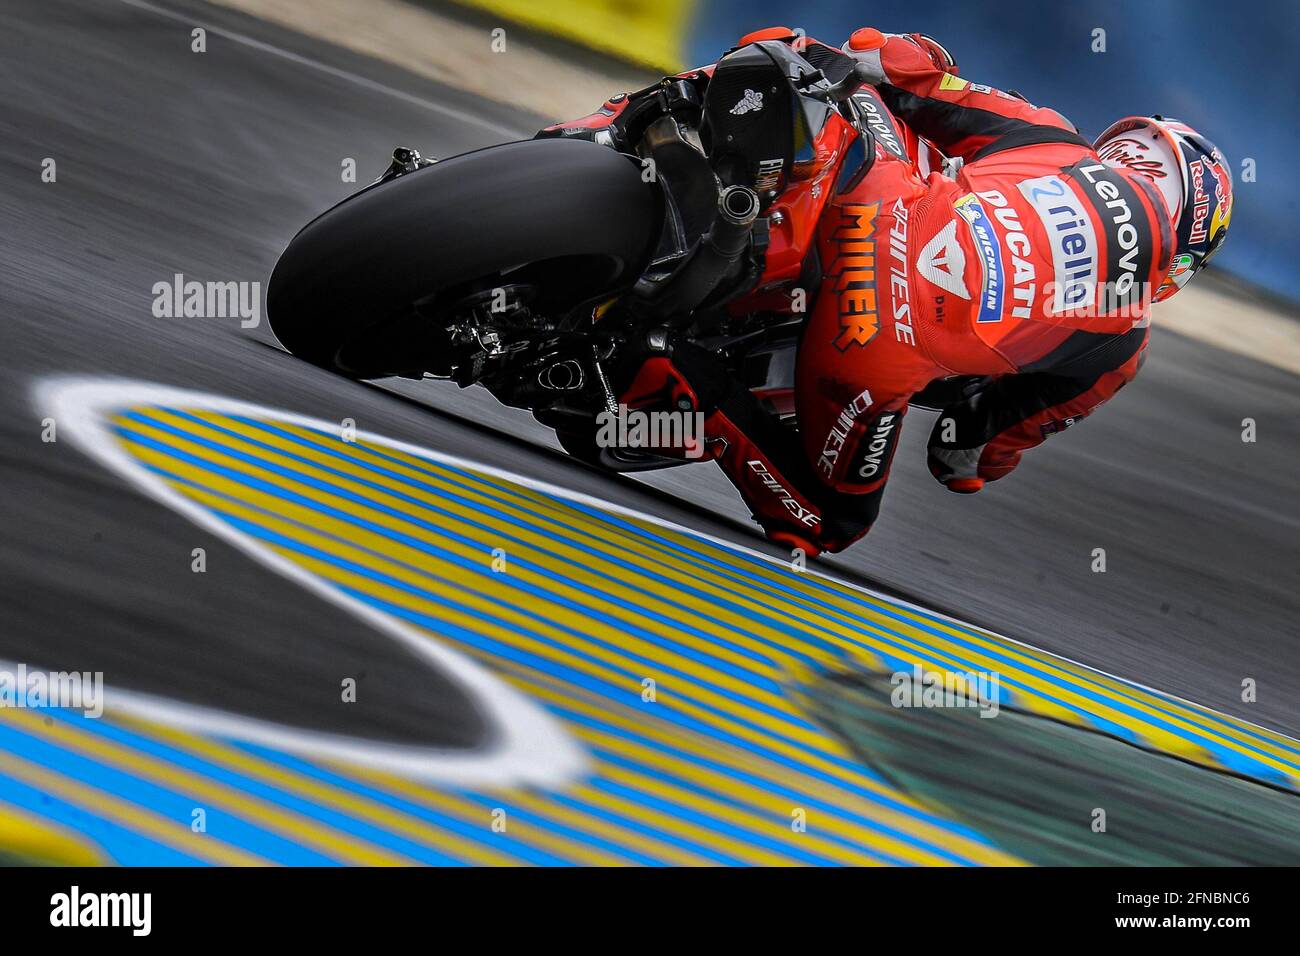 Le Mans, France. 15th May, 2021. Qualifying for MotoGP SHARK Grand Prix of  France at Le Mans circuit, Francia May 15, 2021 In picture: Miller  Clasificacion para el Gran Premio SHARK de